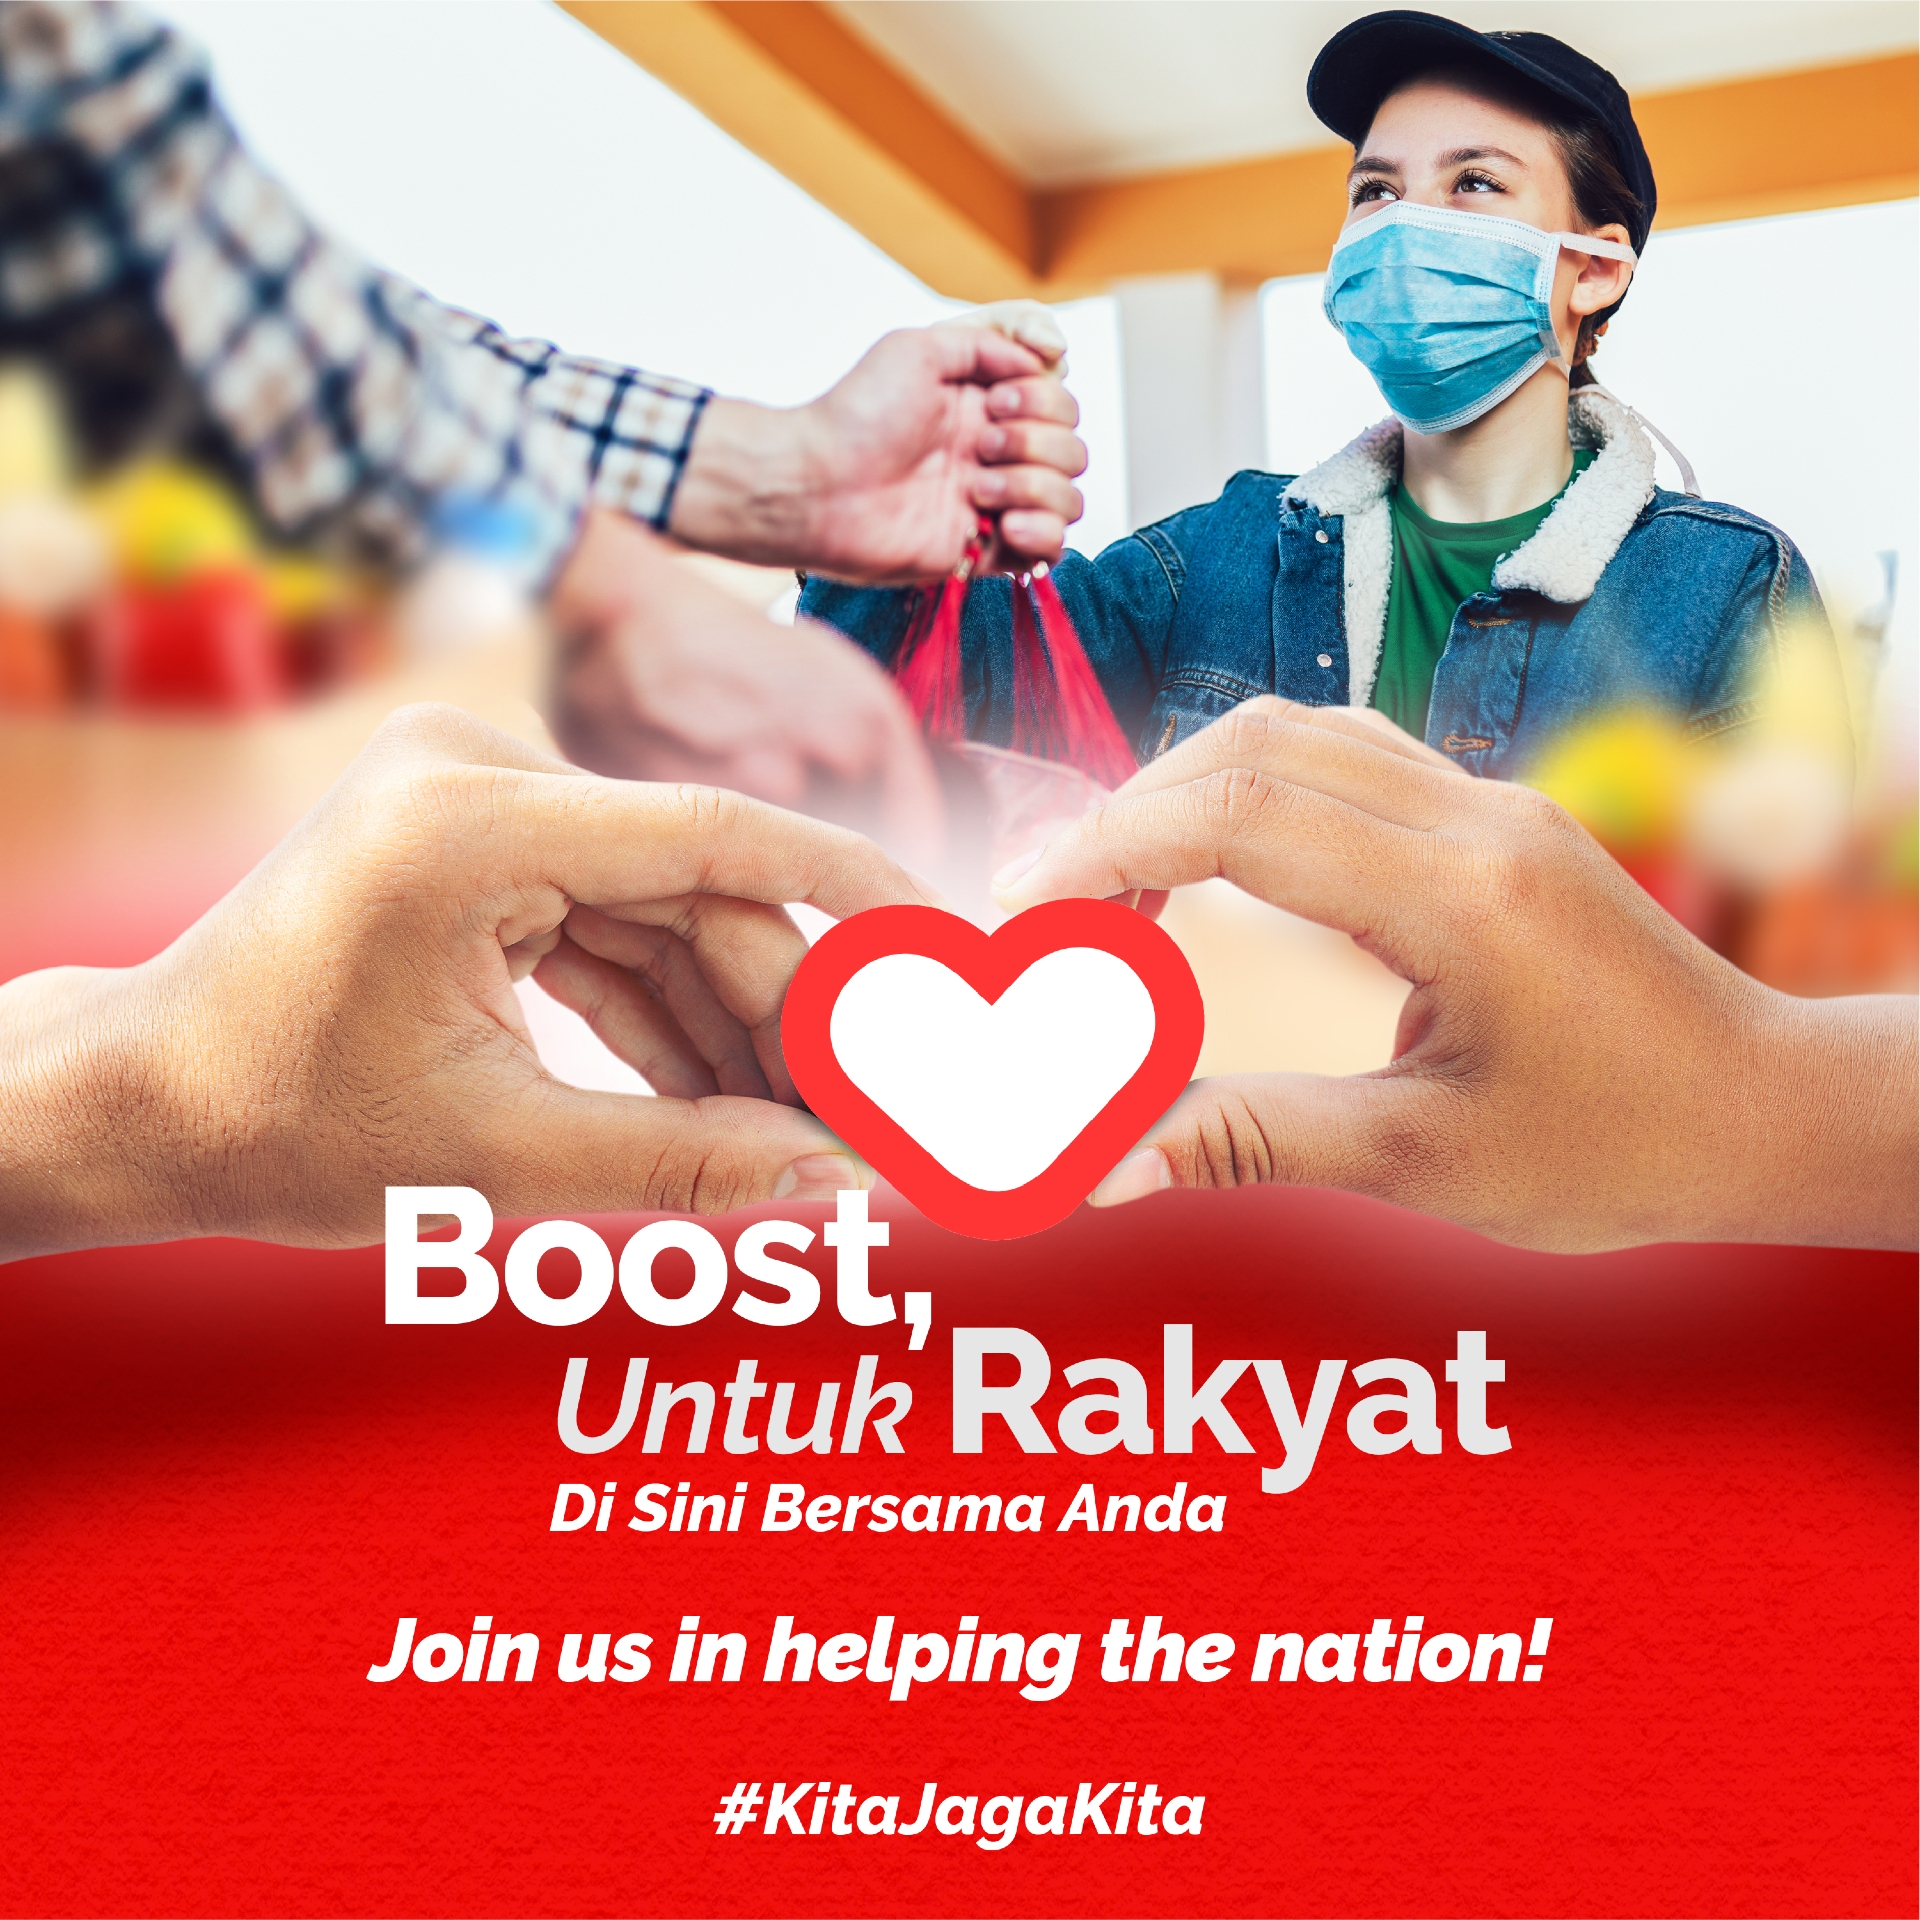 Boosts Untuk Rakyat initiative works together with corporate and merchant partners to provide aid and hope to struggling Malaysians during this time of adversity